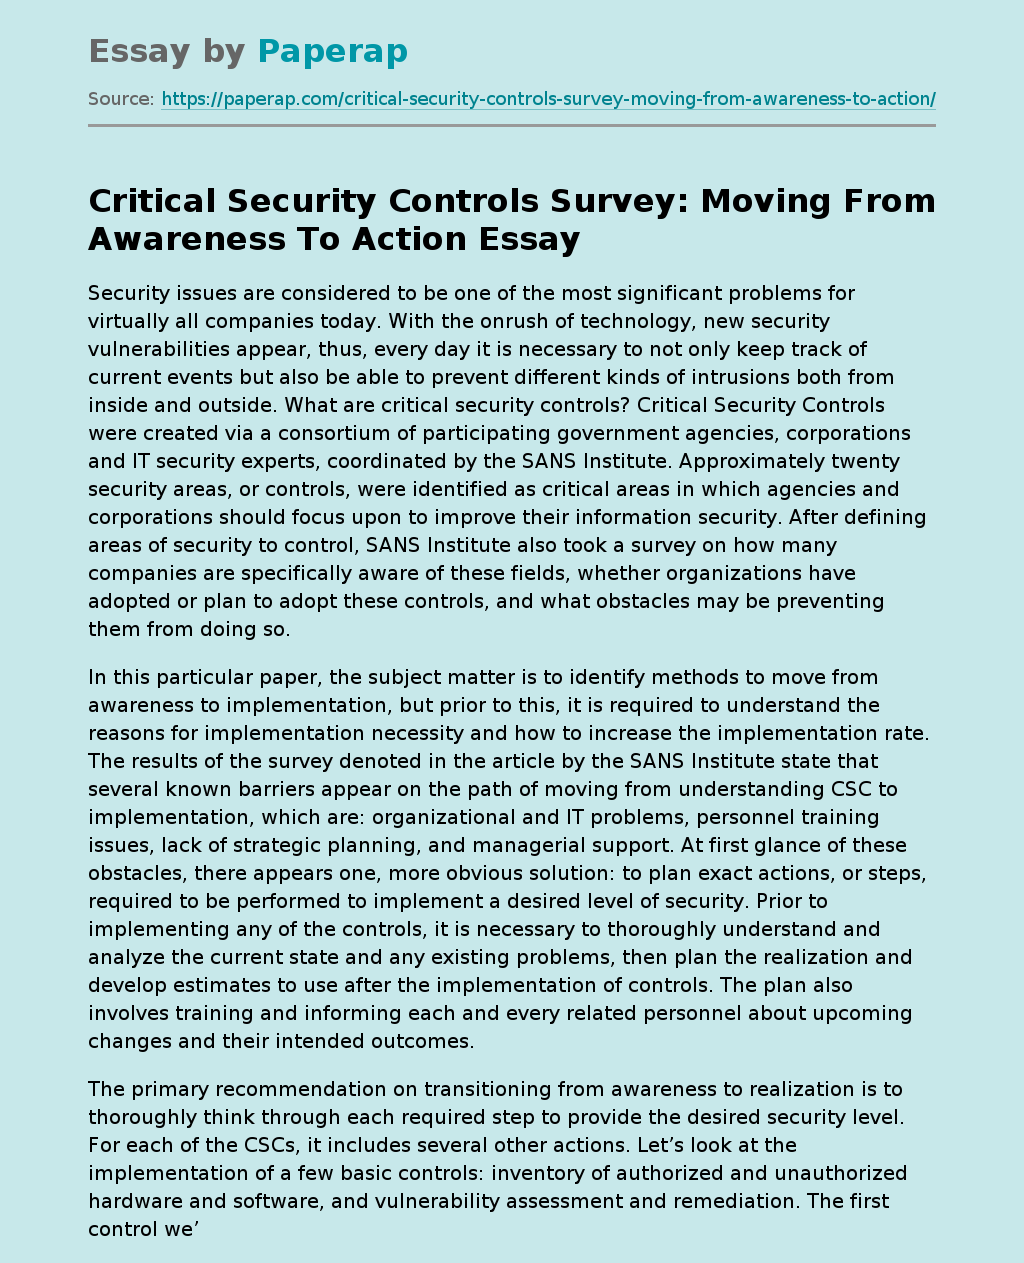 Critical Security Controls Survey: Moving From Awareness To Action